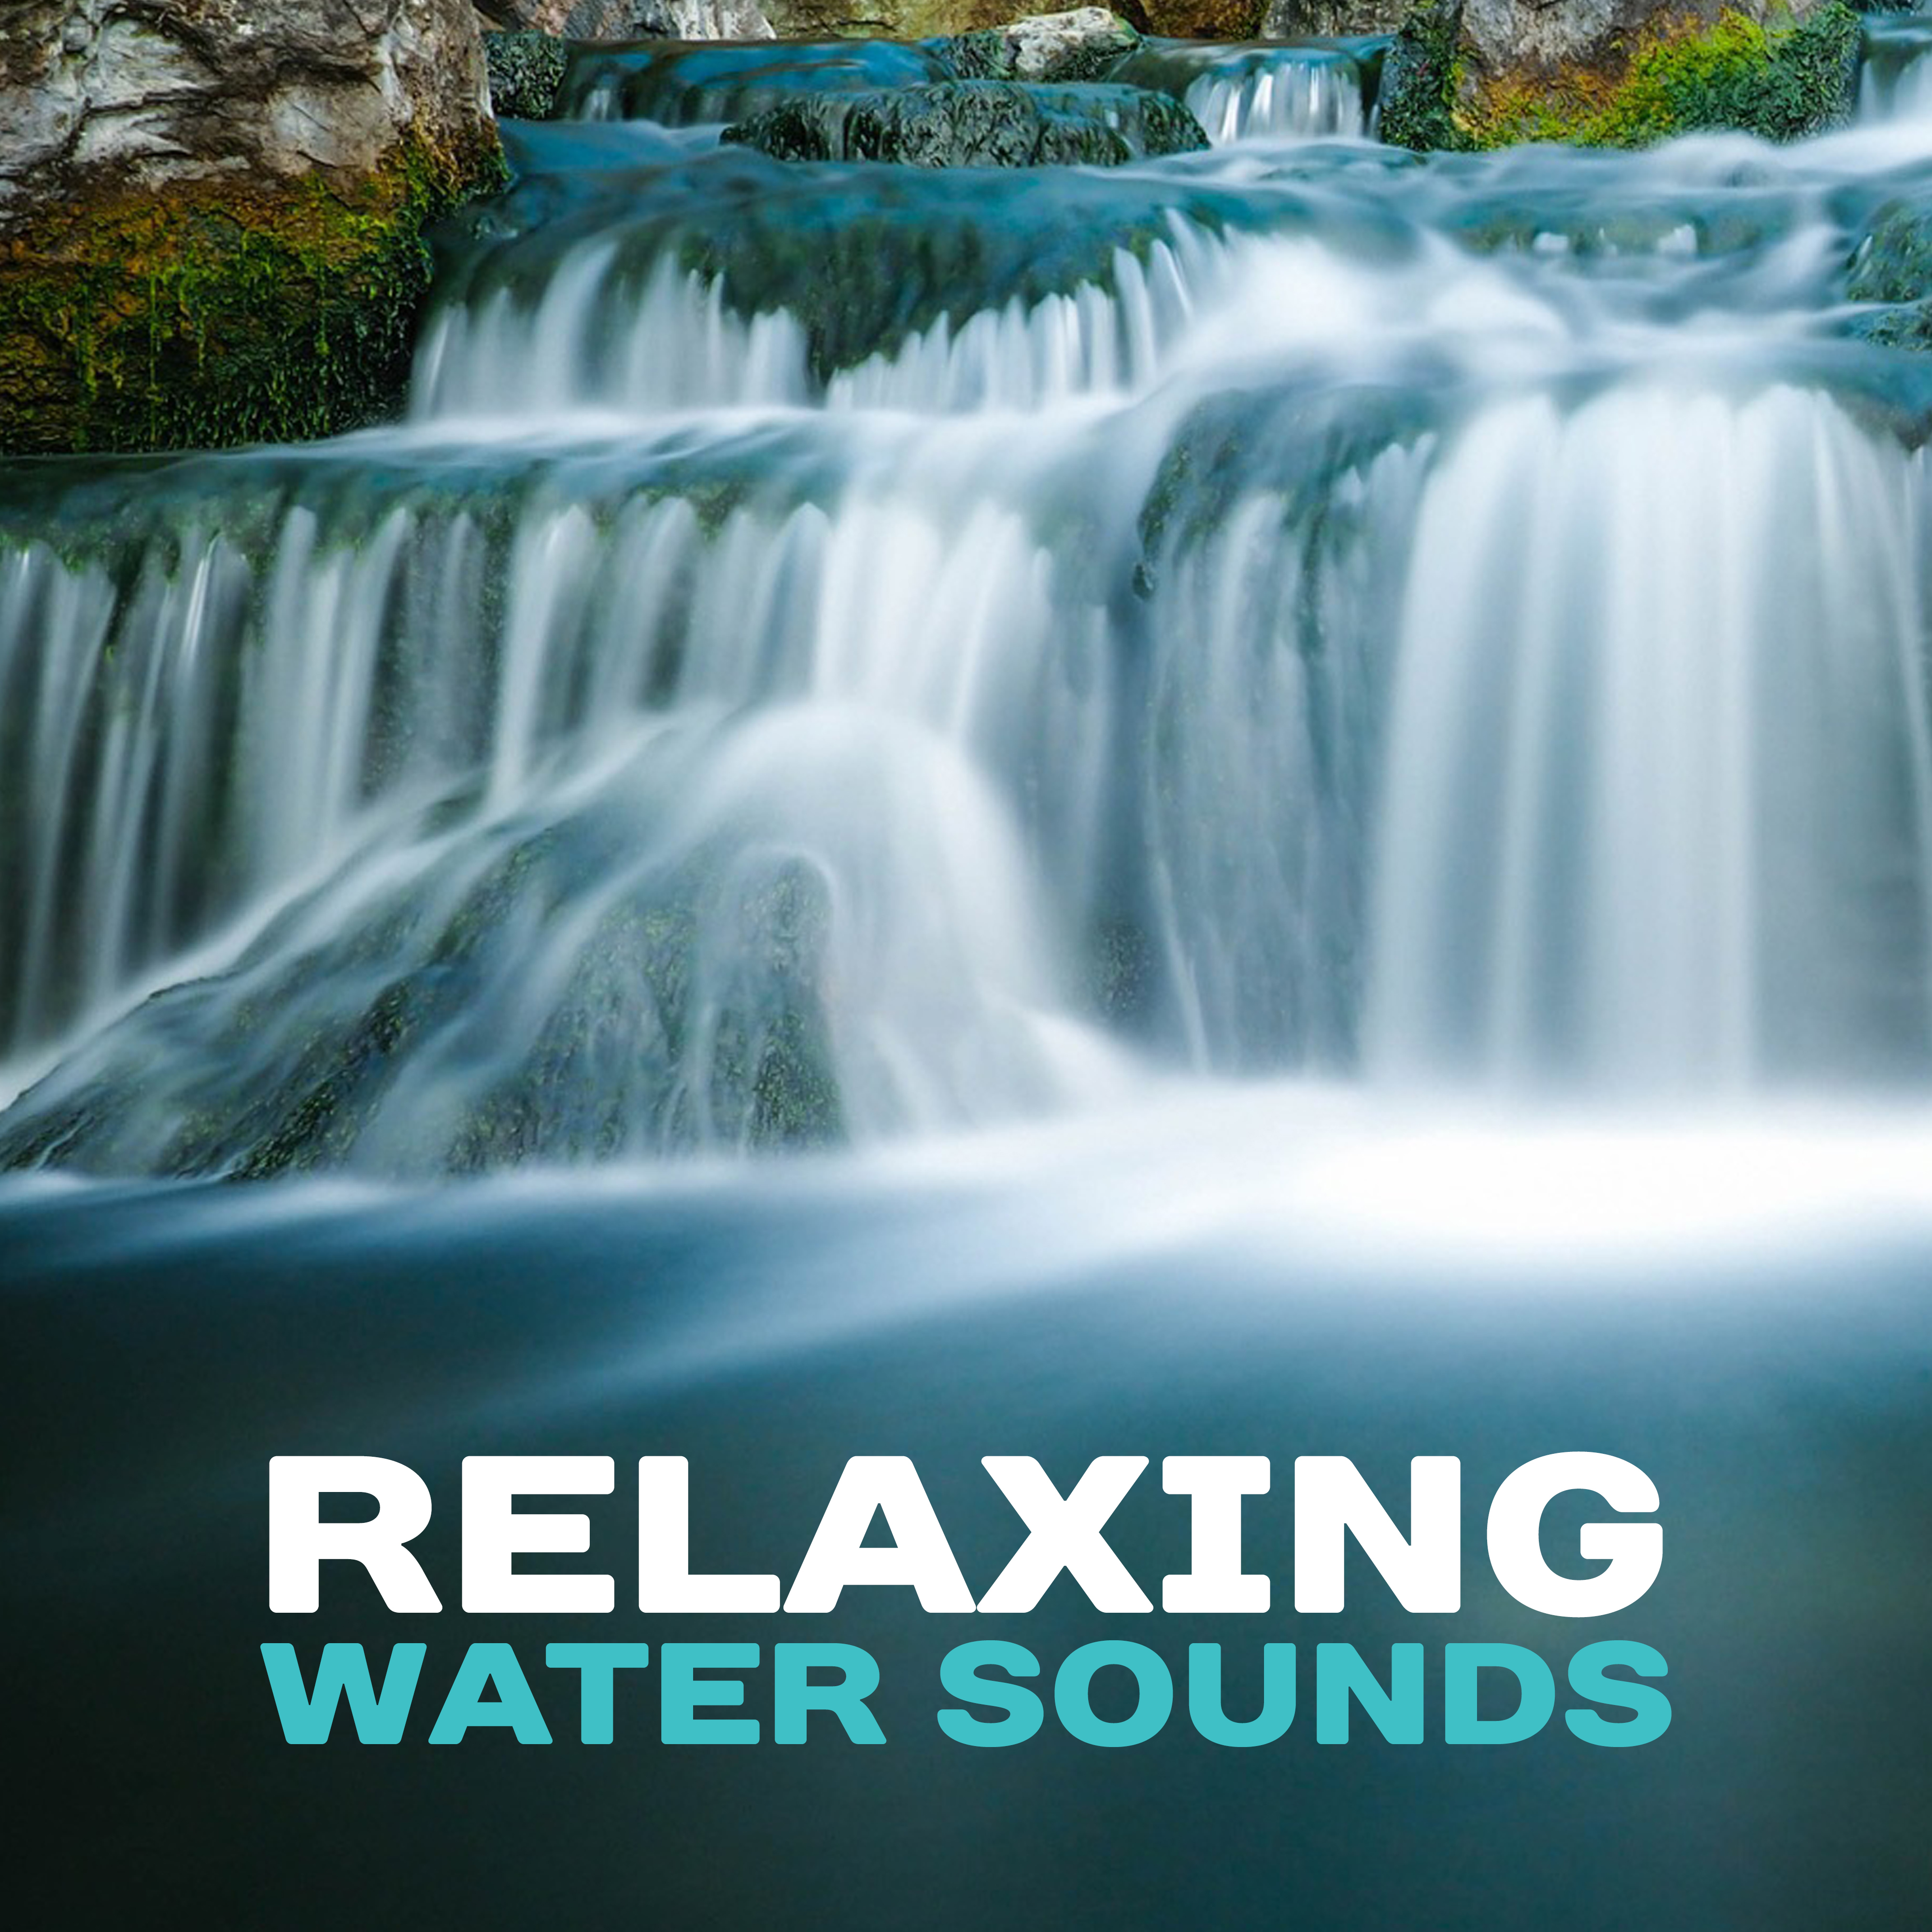 Relaxing Water Sounds – Healing Therapy, Sounds of Water, Nature Waves, Rest Yourself